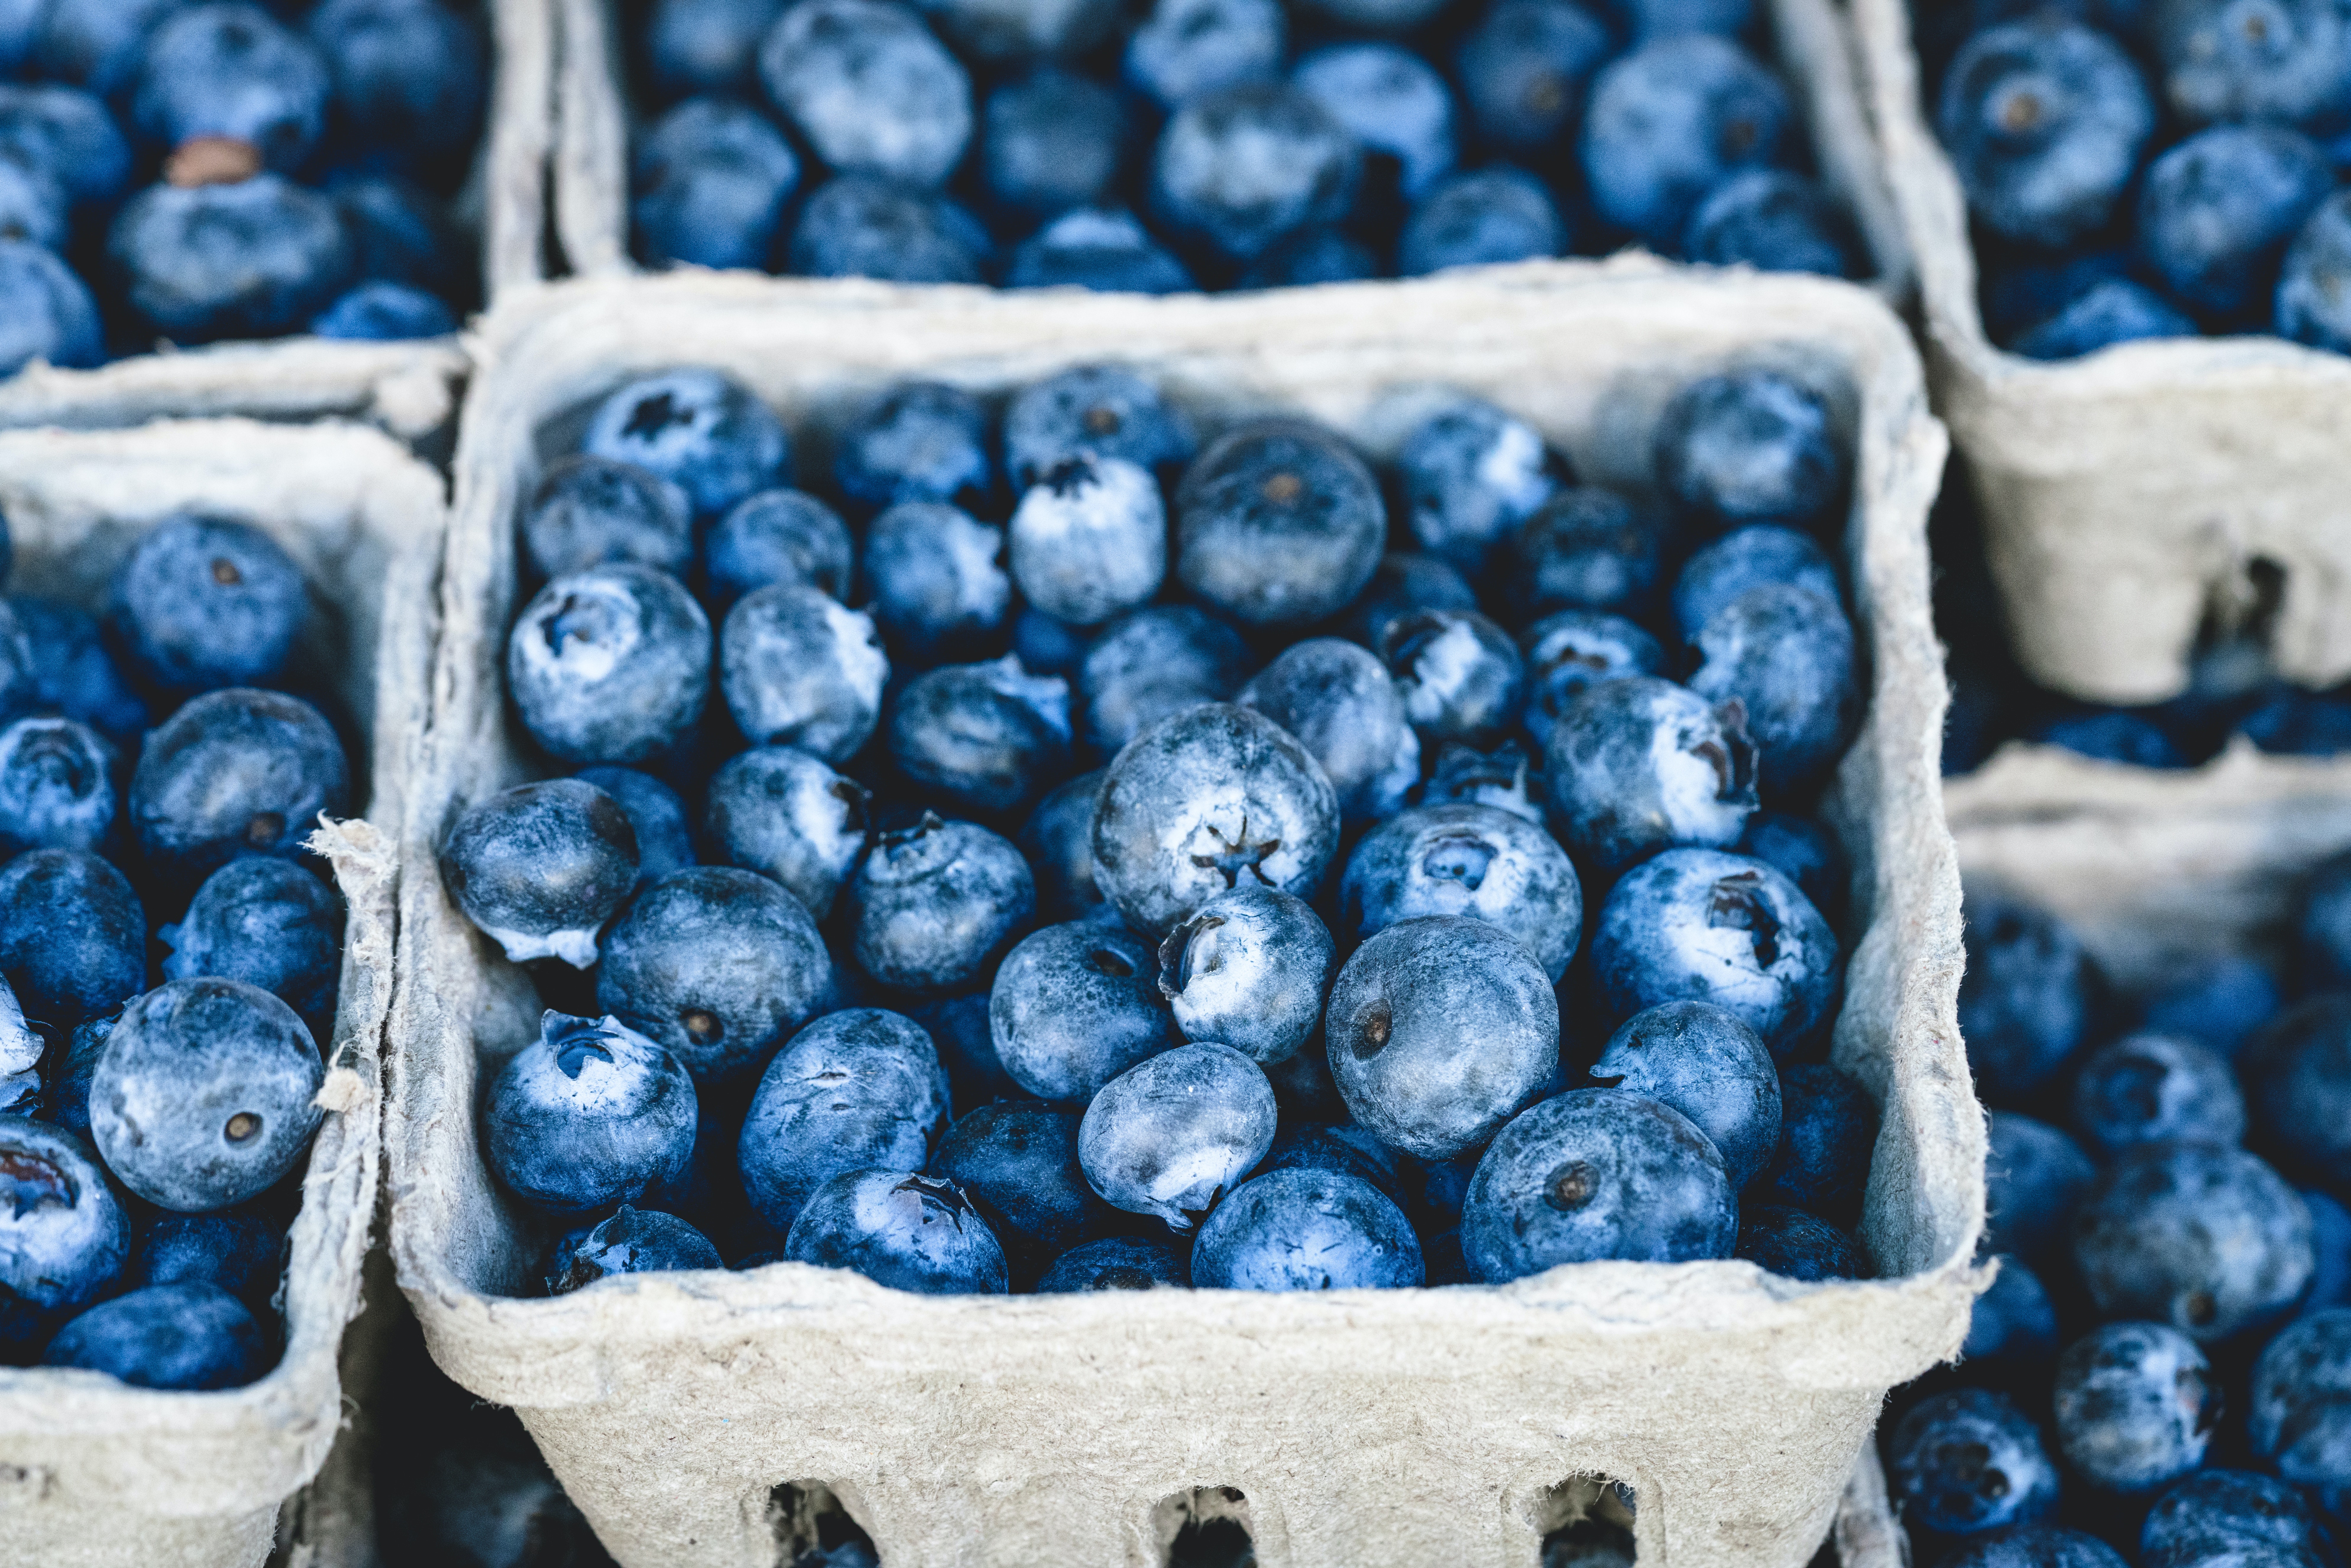 International Blueberry Organization Releases 2022 Industry Report